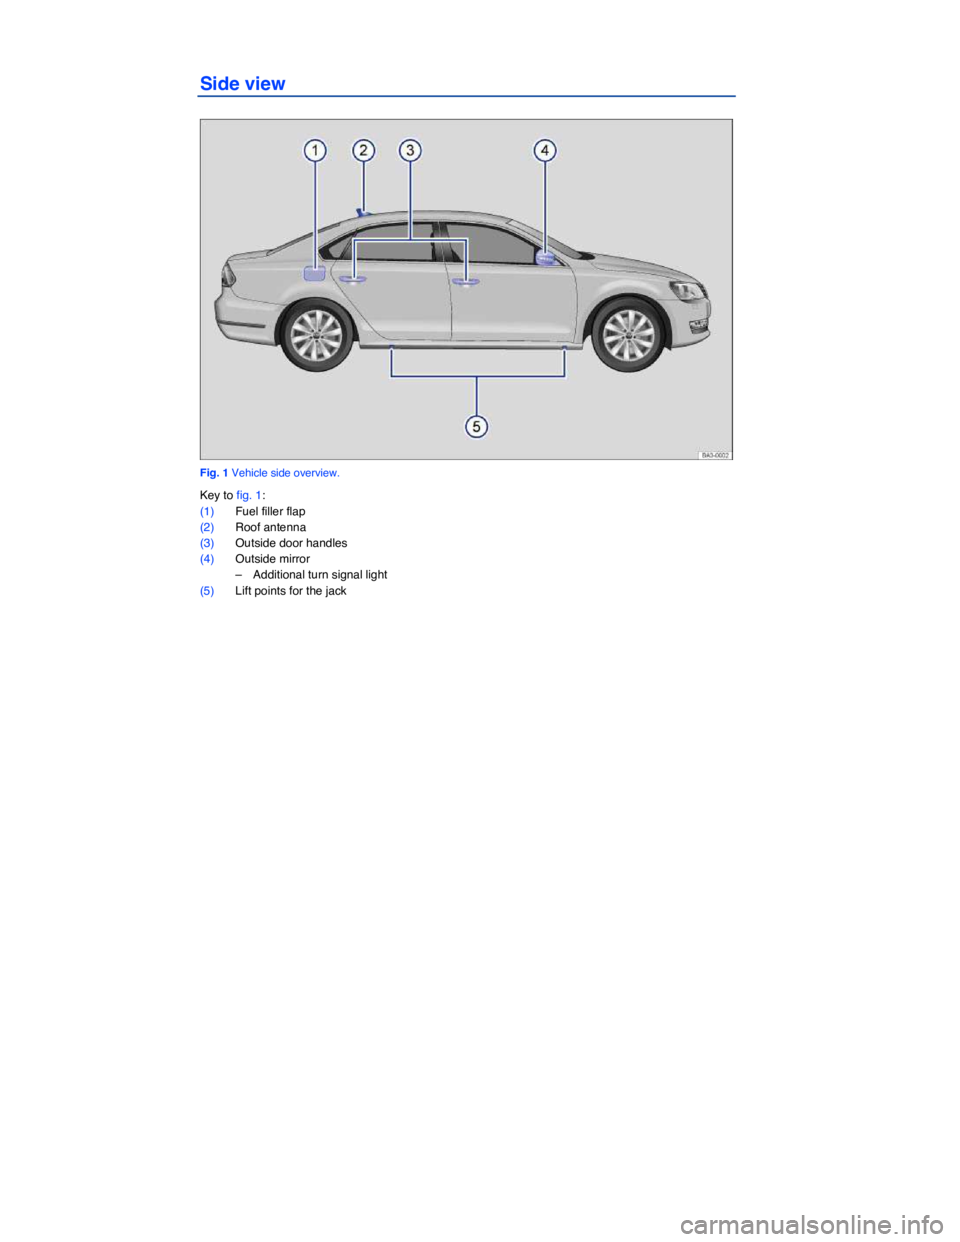 VOLKSWAGEN PASSAT 2010  Owners Manual  
Side view 
 
Fig. 1 Vehicle side overview. 
Key to fig. 1: 
(1) Fuel filler flap  
(2) Roof antenna  
(3) Outside door handles  
(4) Outside mirror  
–  Additional turn signal light  
(5) Lift poi